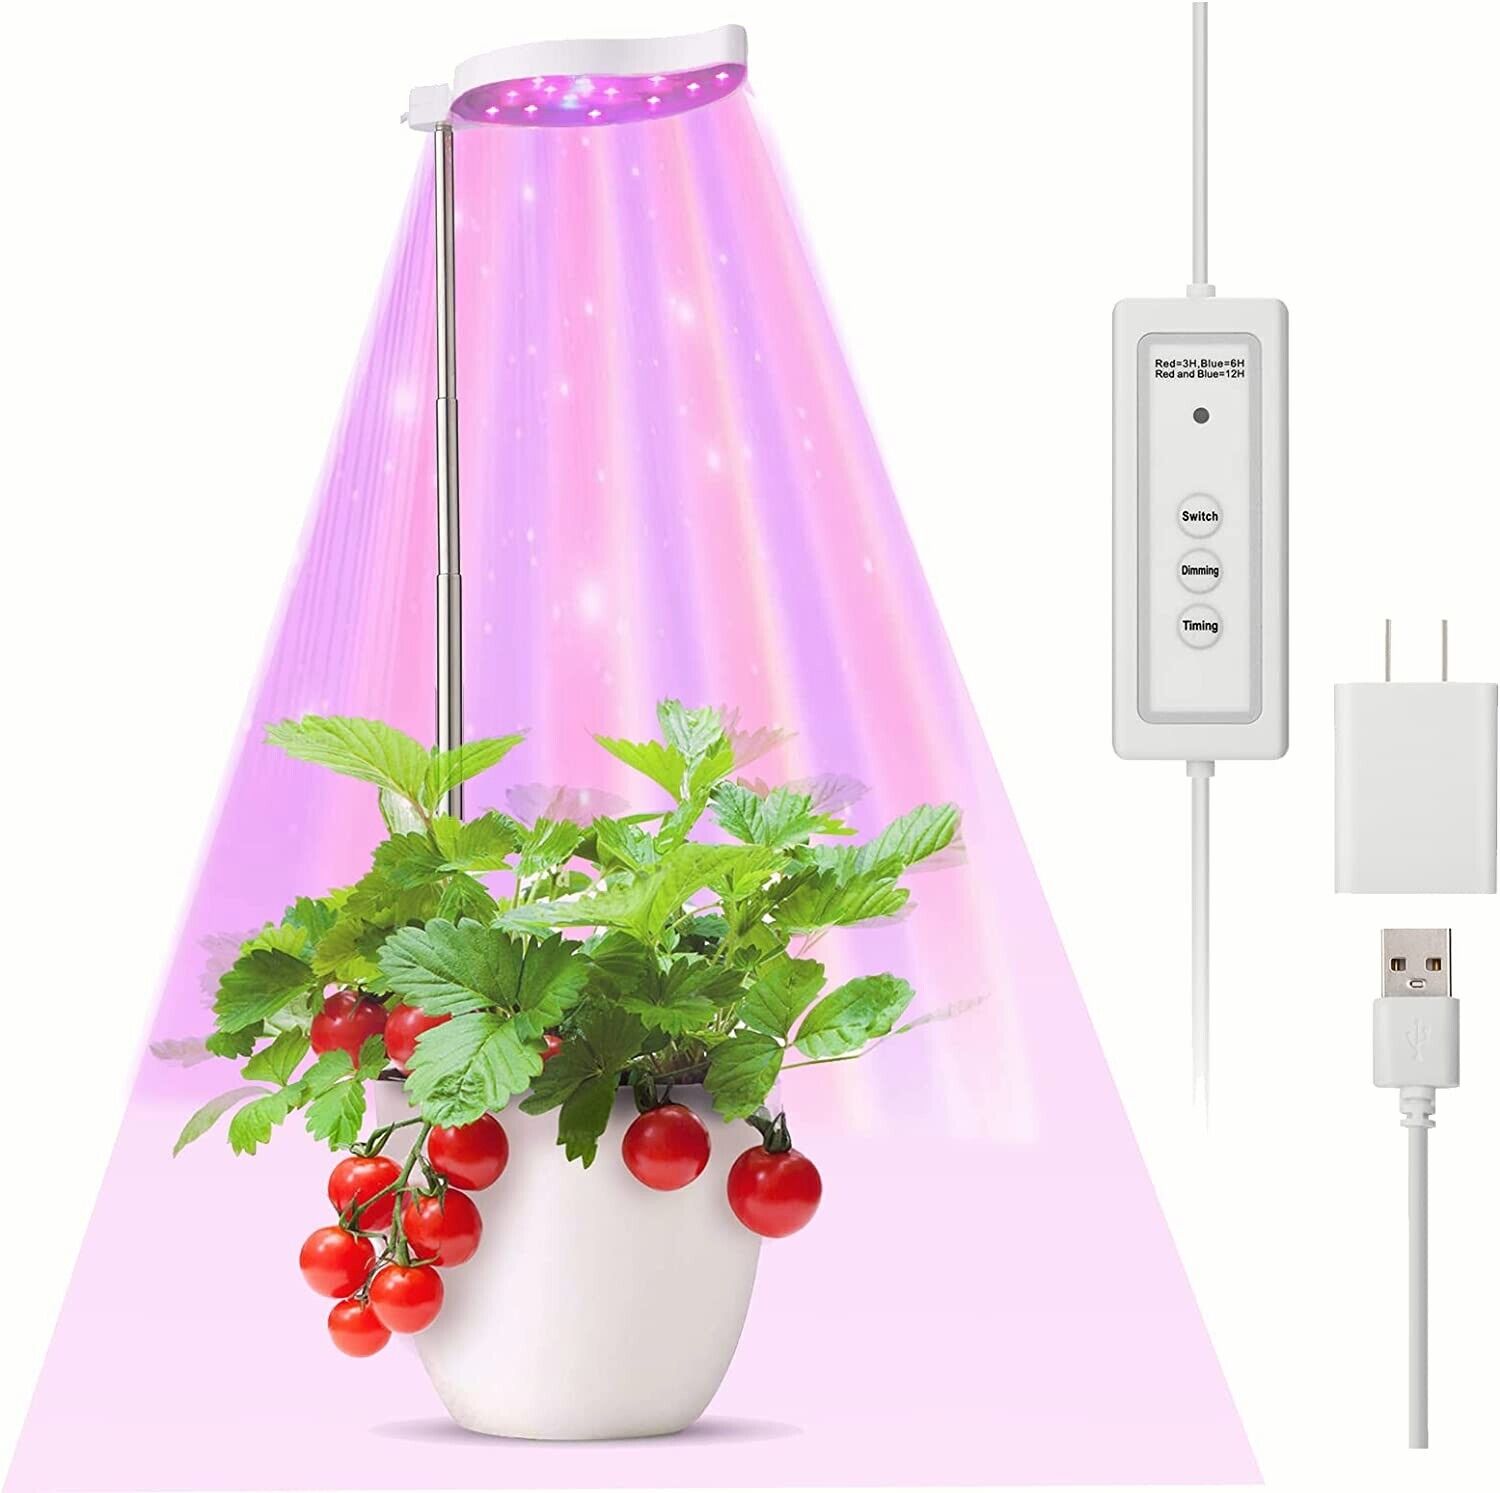 Yuego Grow Lights for Small Plants Growing, LED Grow Light 3 Colors Conversion#